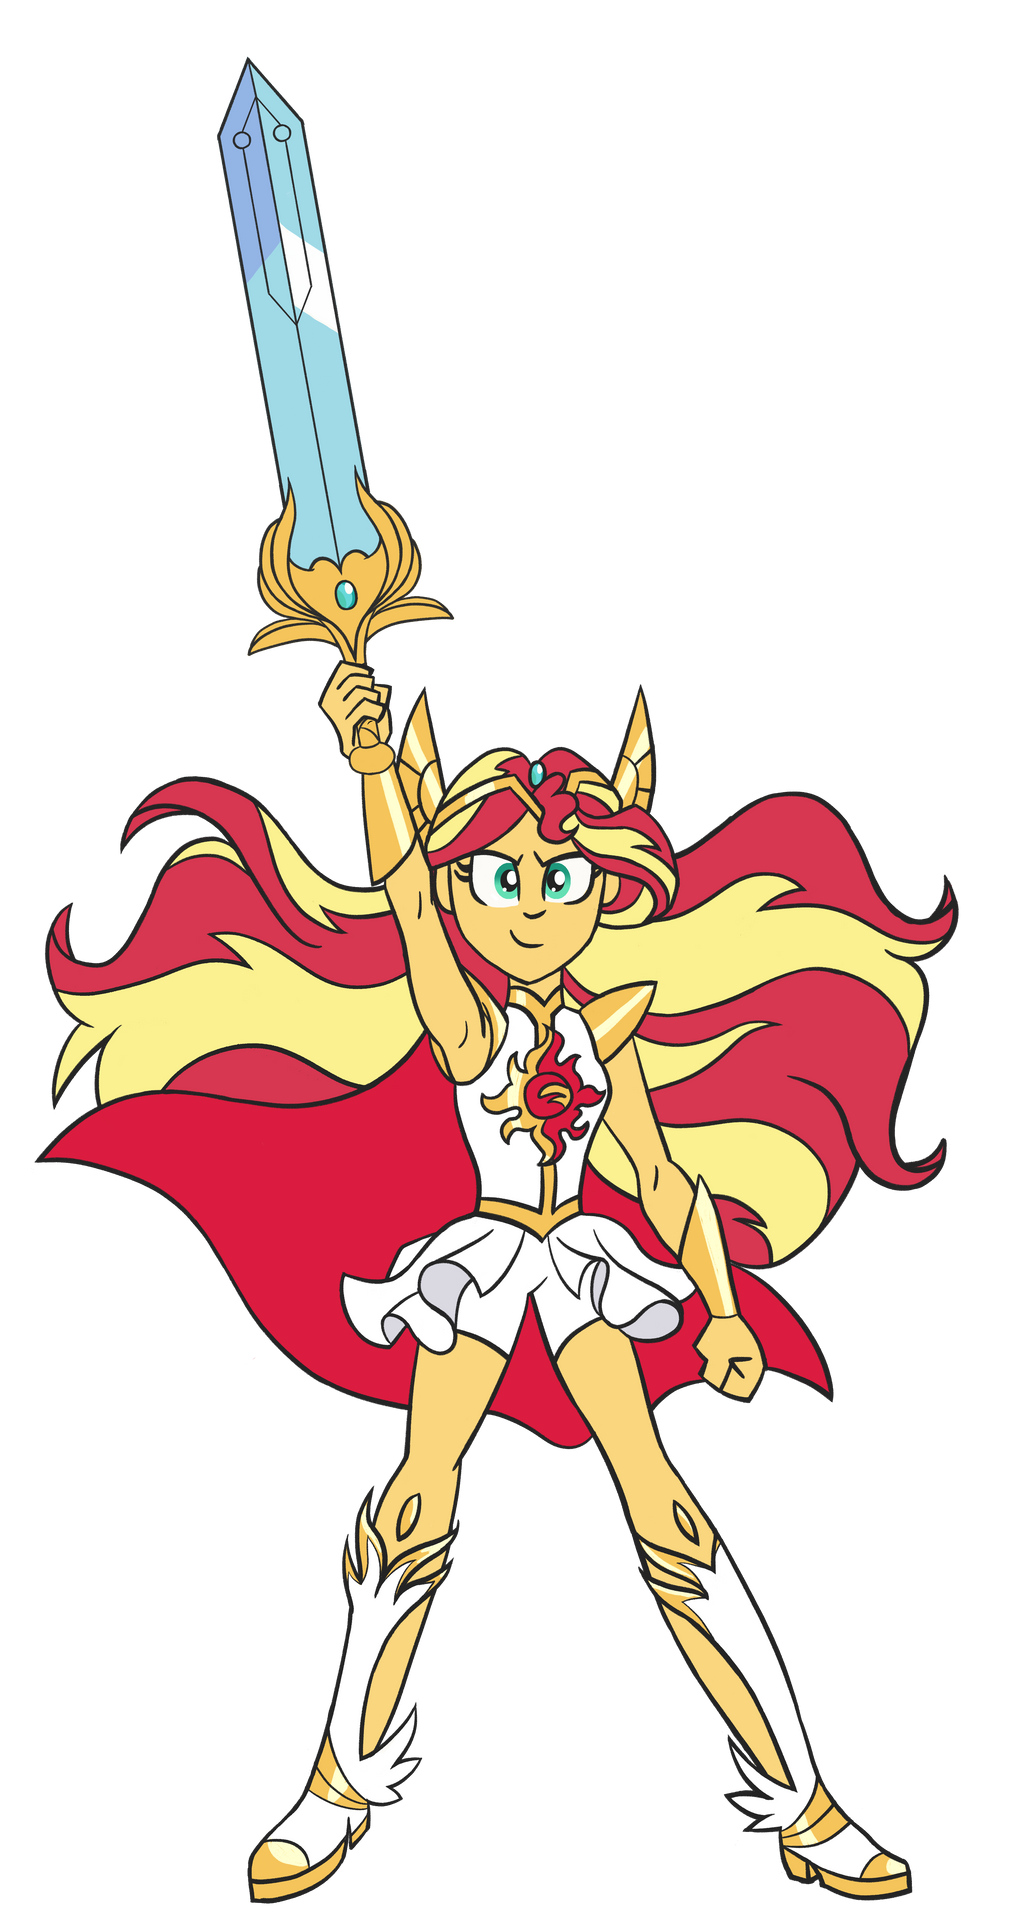 my_little_she_ra___sunset_by_sugar_loop_ddpt75m-fullview.png